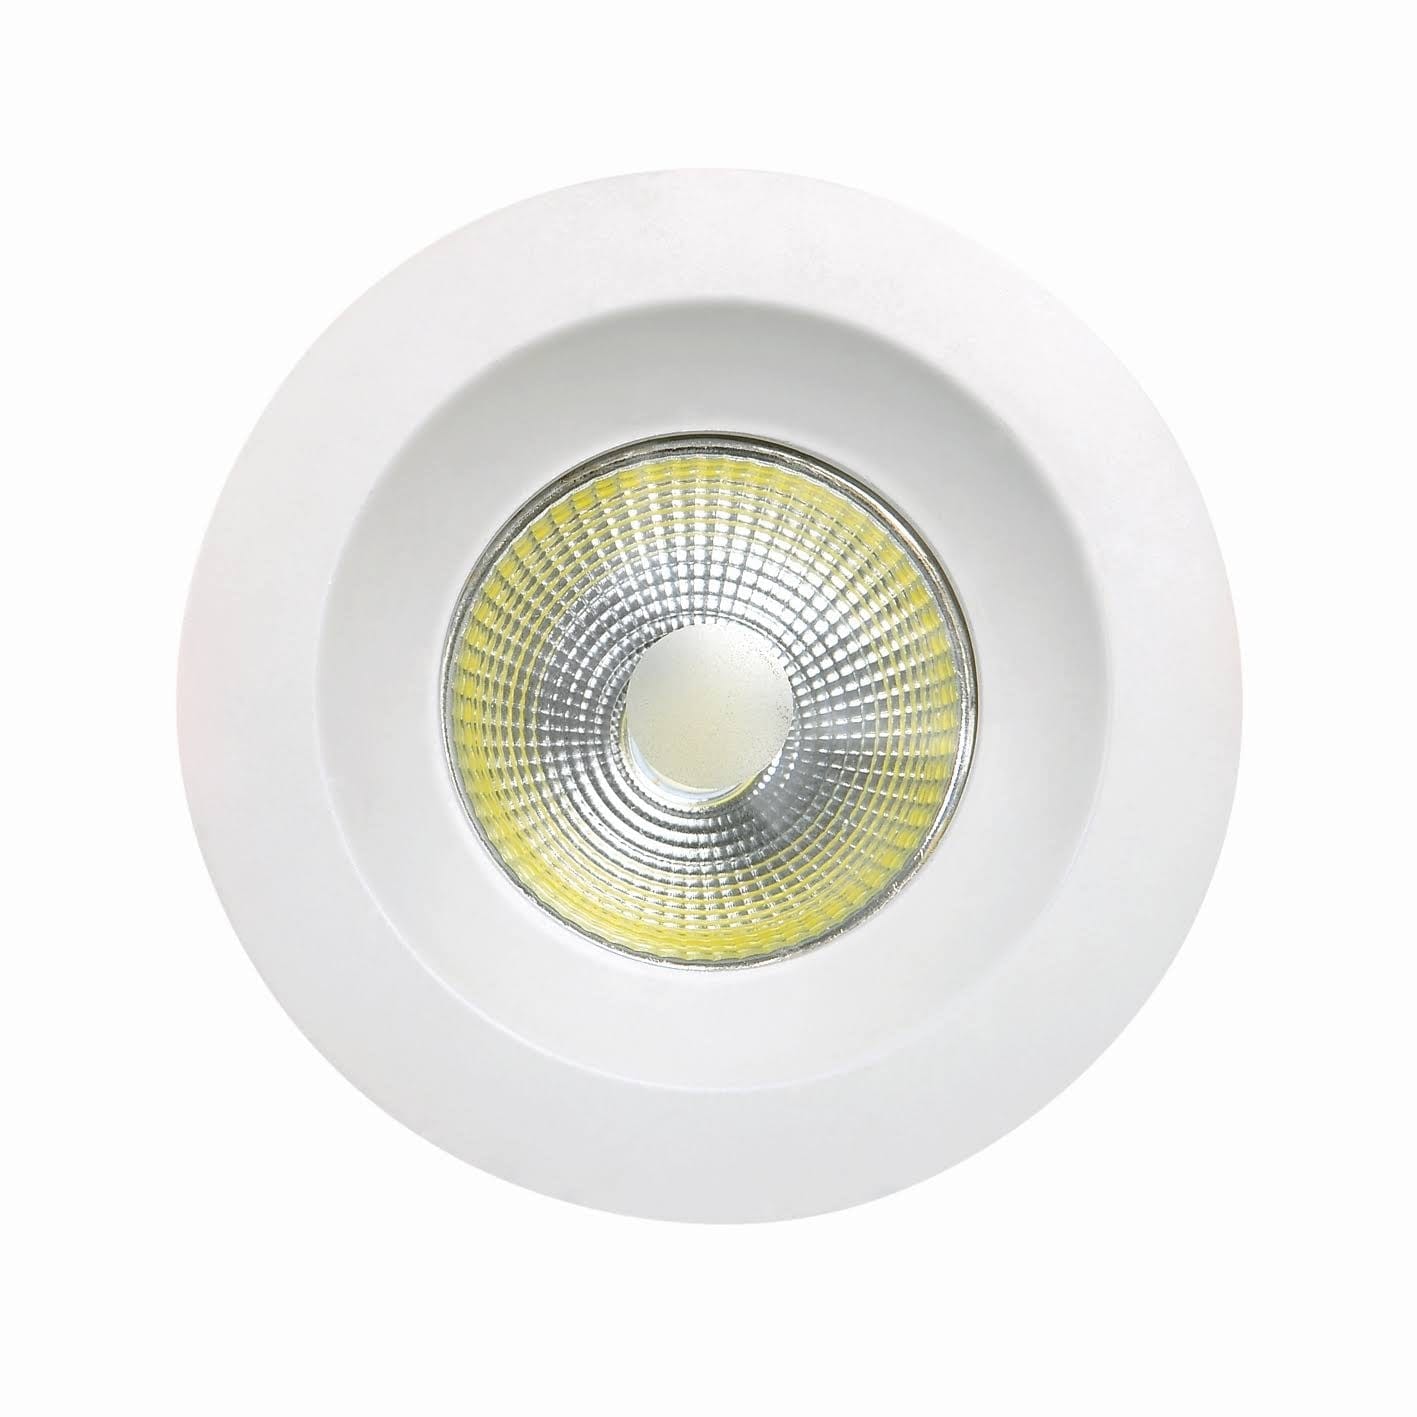 Buy LED Recessed Ceiling Downlight 10W White - SPM-07 | Shop at Supply Master Accra, Ghana Lamps & Lightings Buy Tools hardware Building materials